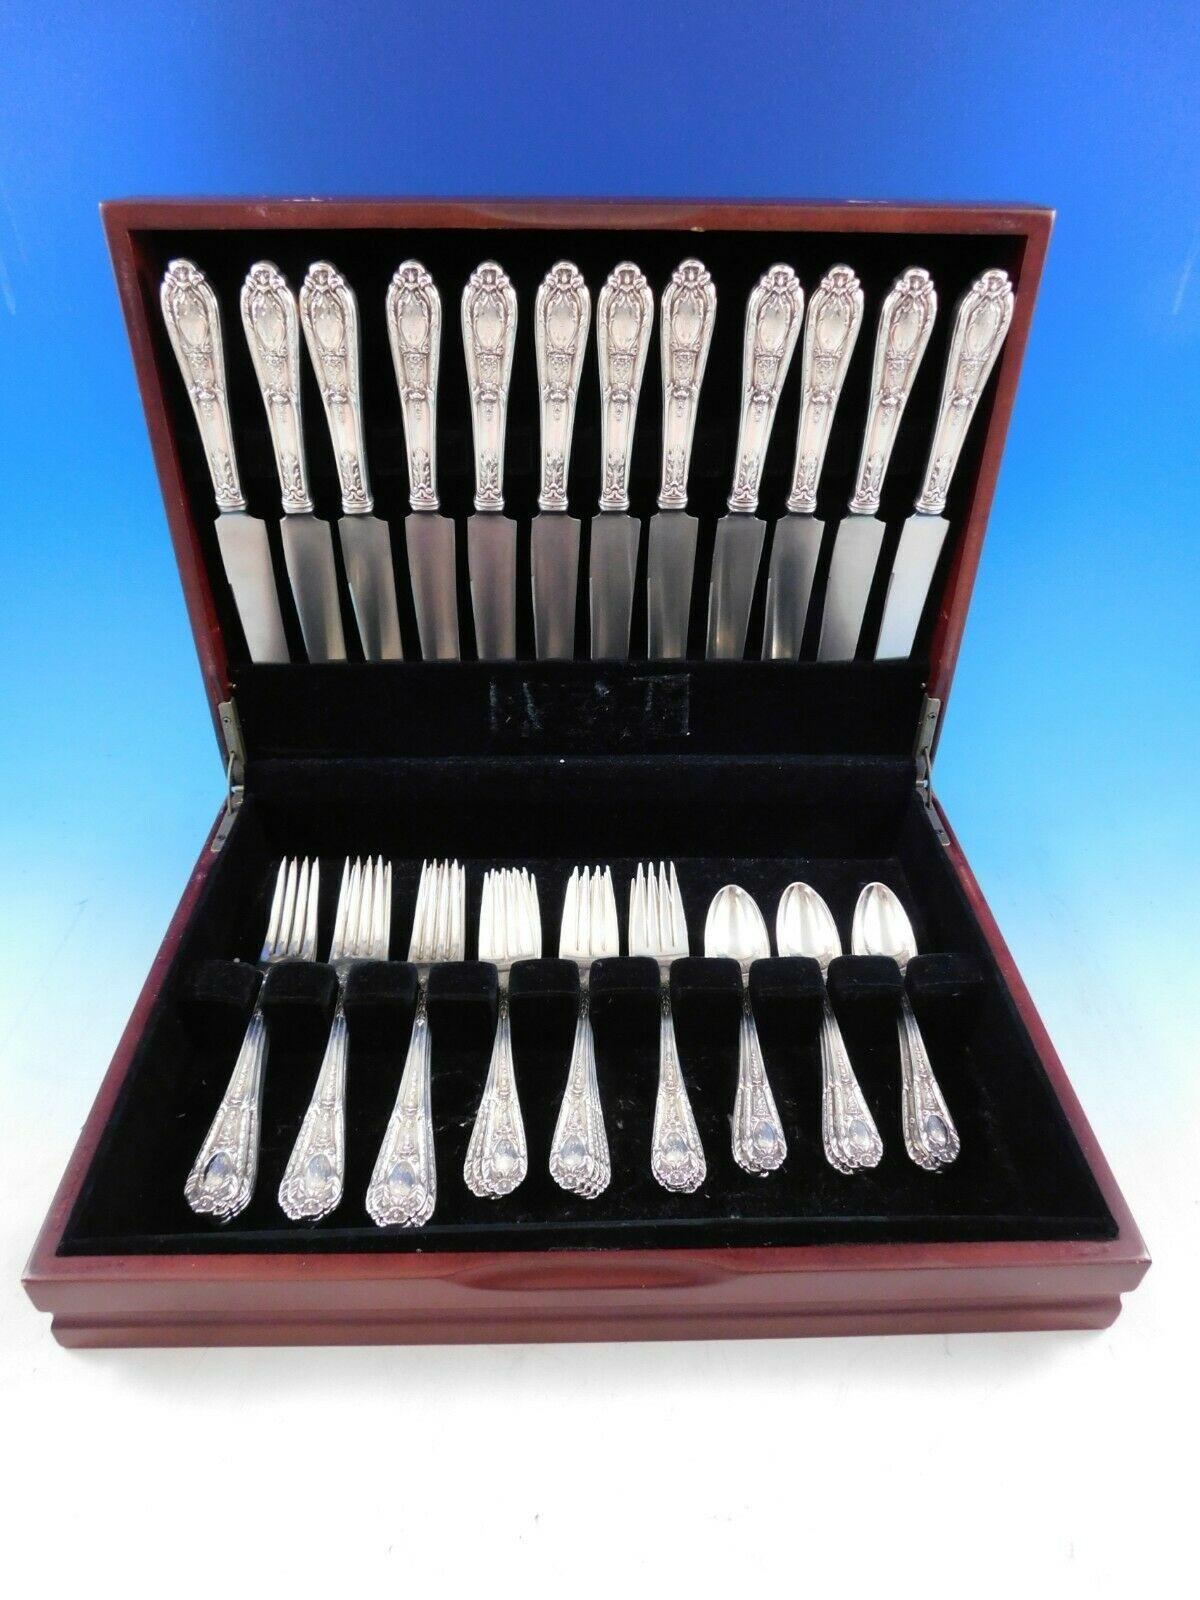 Fontaine by International sterling silver flatware set - 48 pieces. This set includes:
12 dinner size knives, 9 1/2